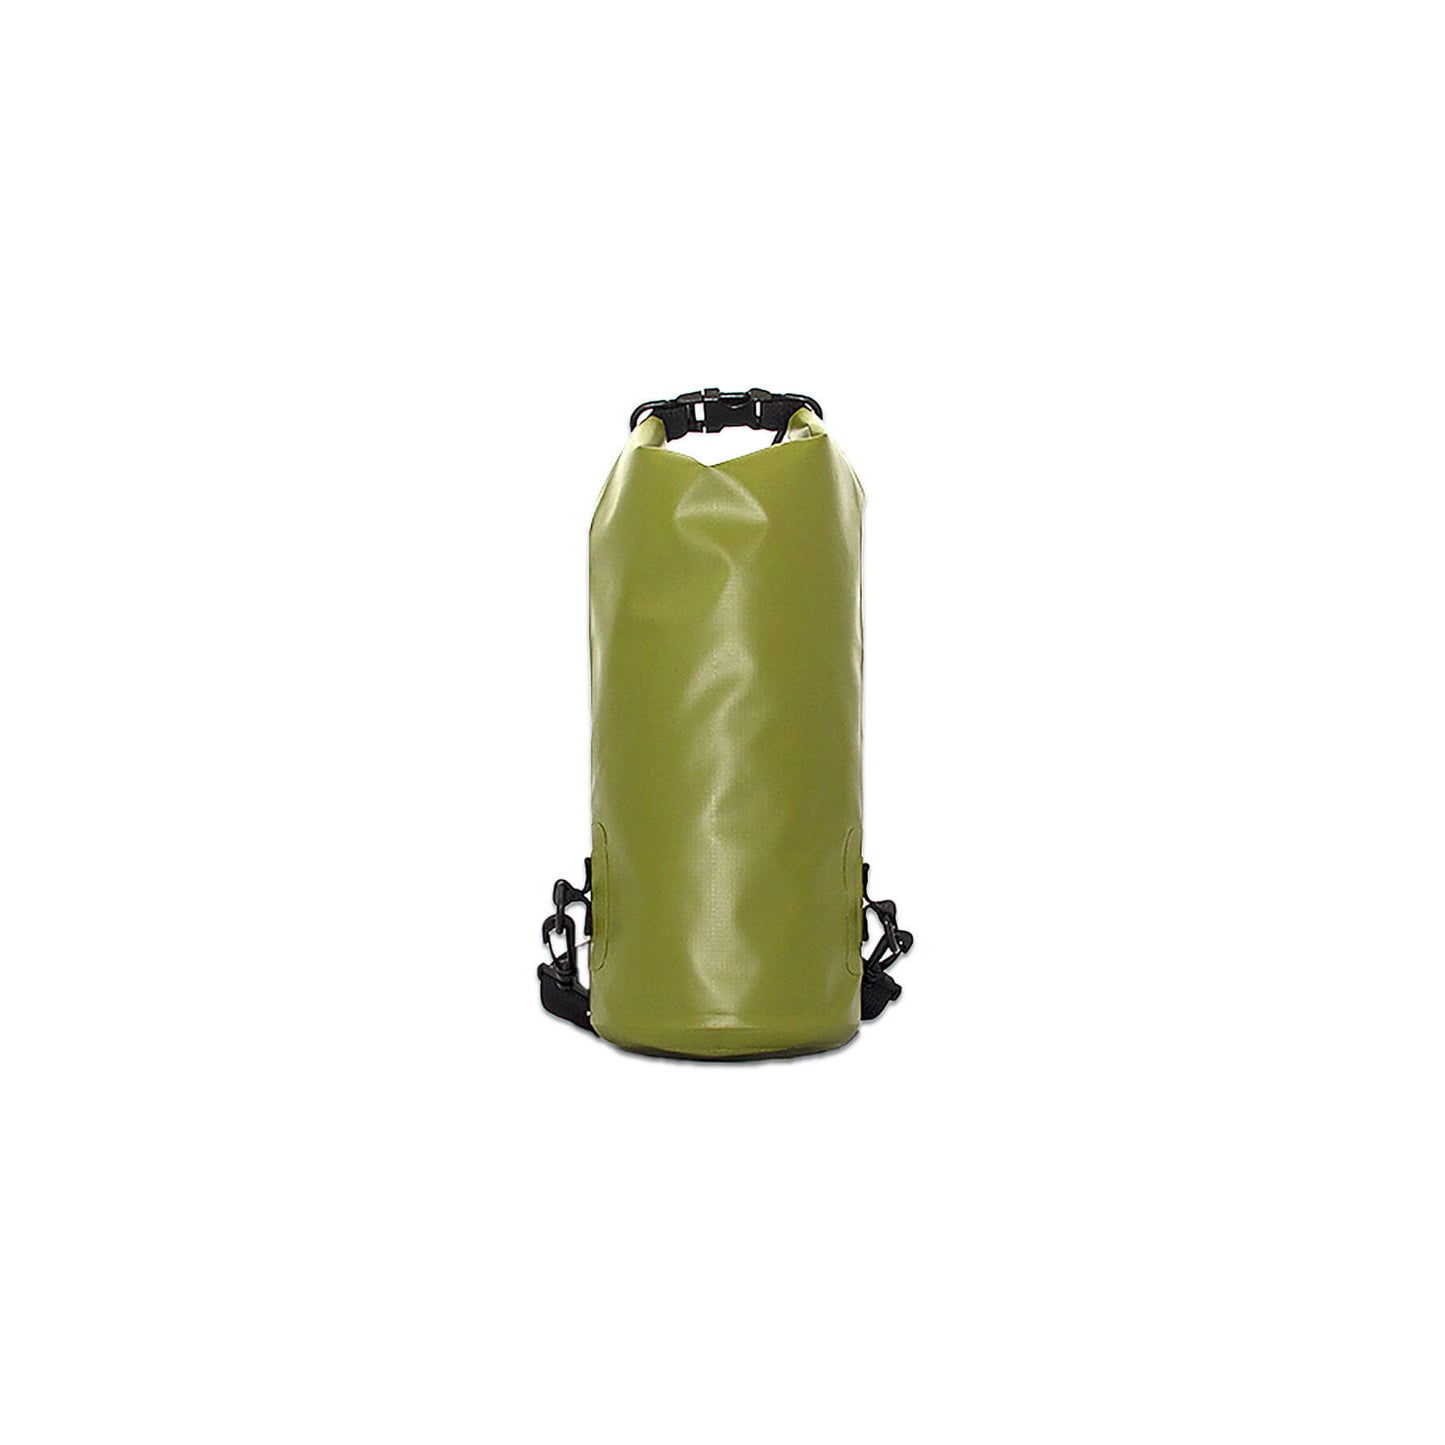 waterproof dry bag 5 litres a handy grab size with detachable straps and carabiner  in olive the front view